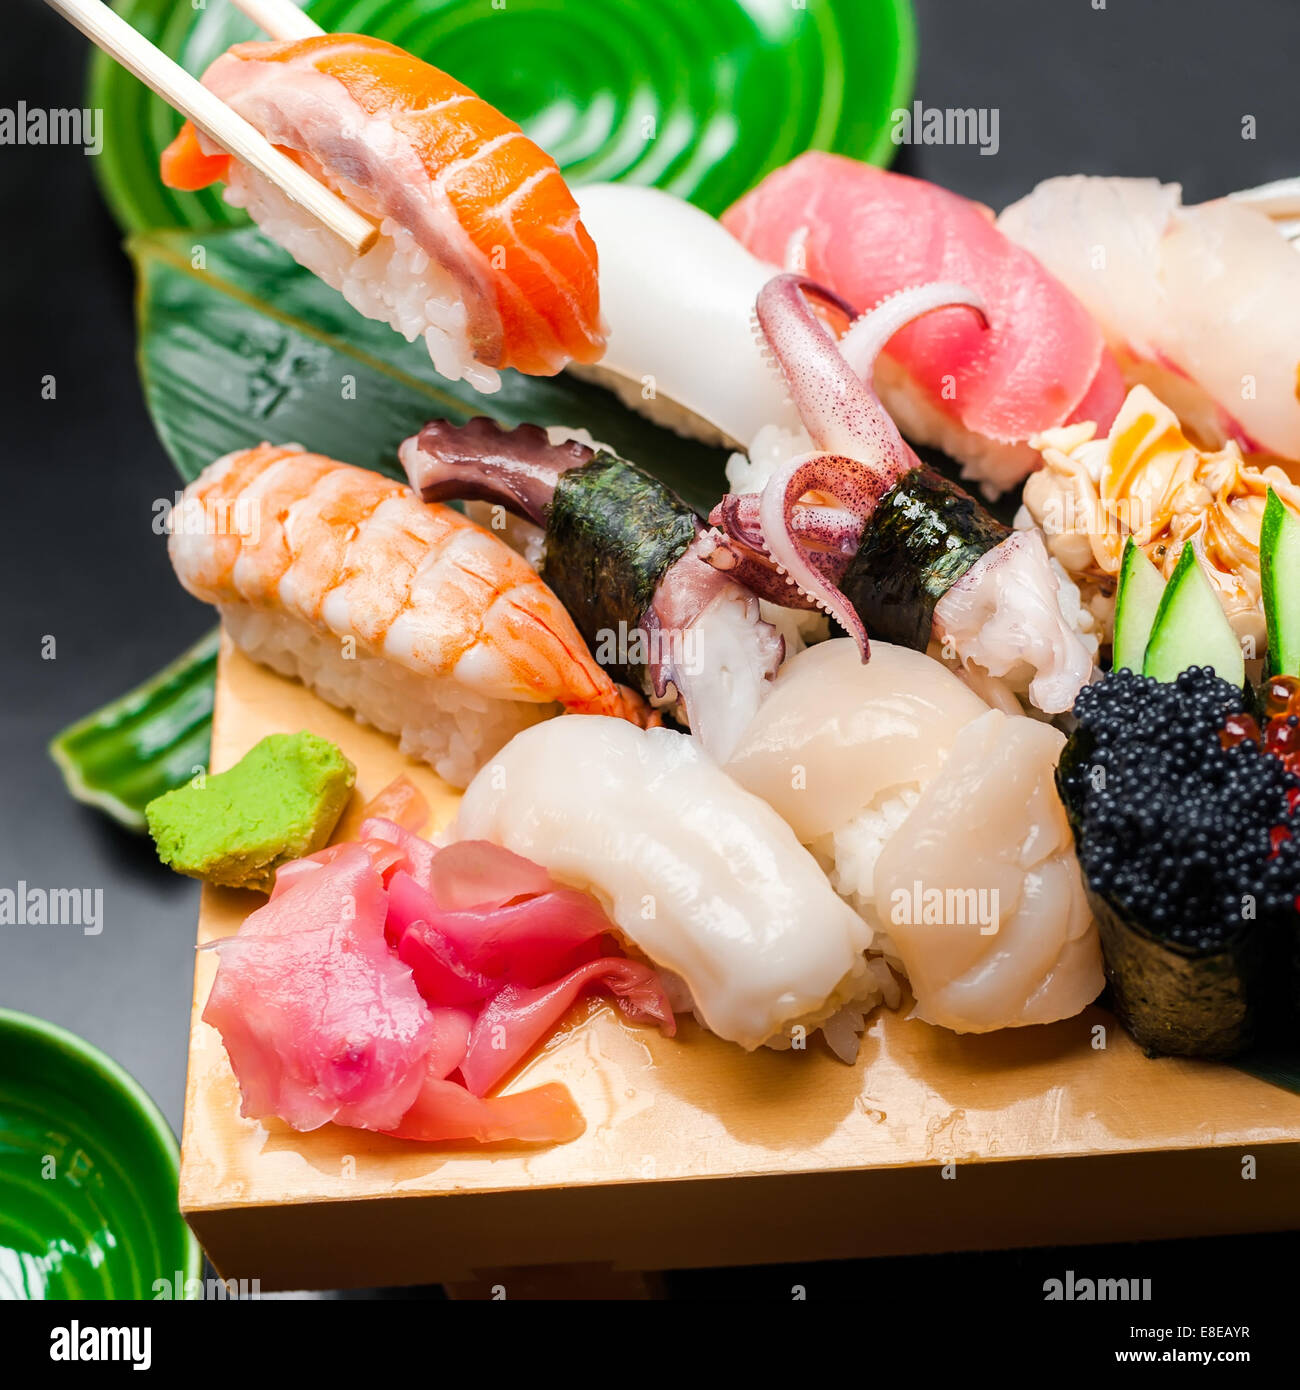 Premium quality sushi rolls served in Japanese restaurant. Asian food background Stock Photo